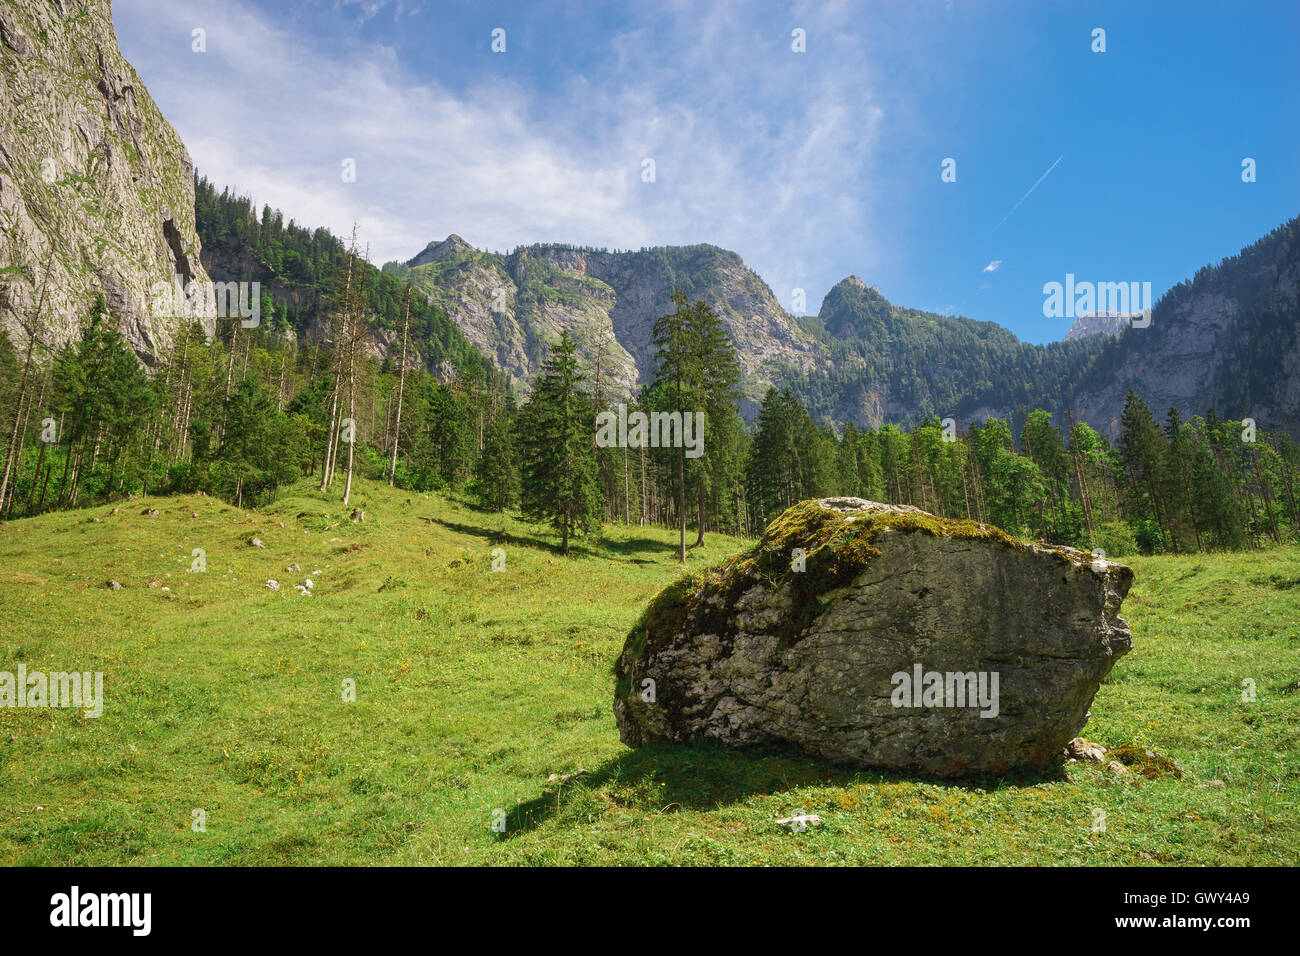 Scenic alpine landscape with mountains, forest and large stone in front Stock Photo